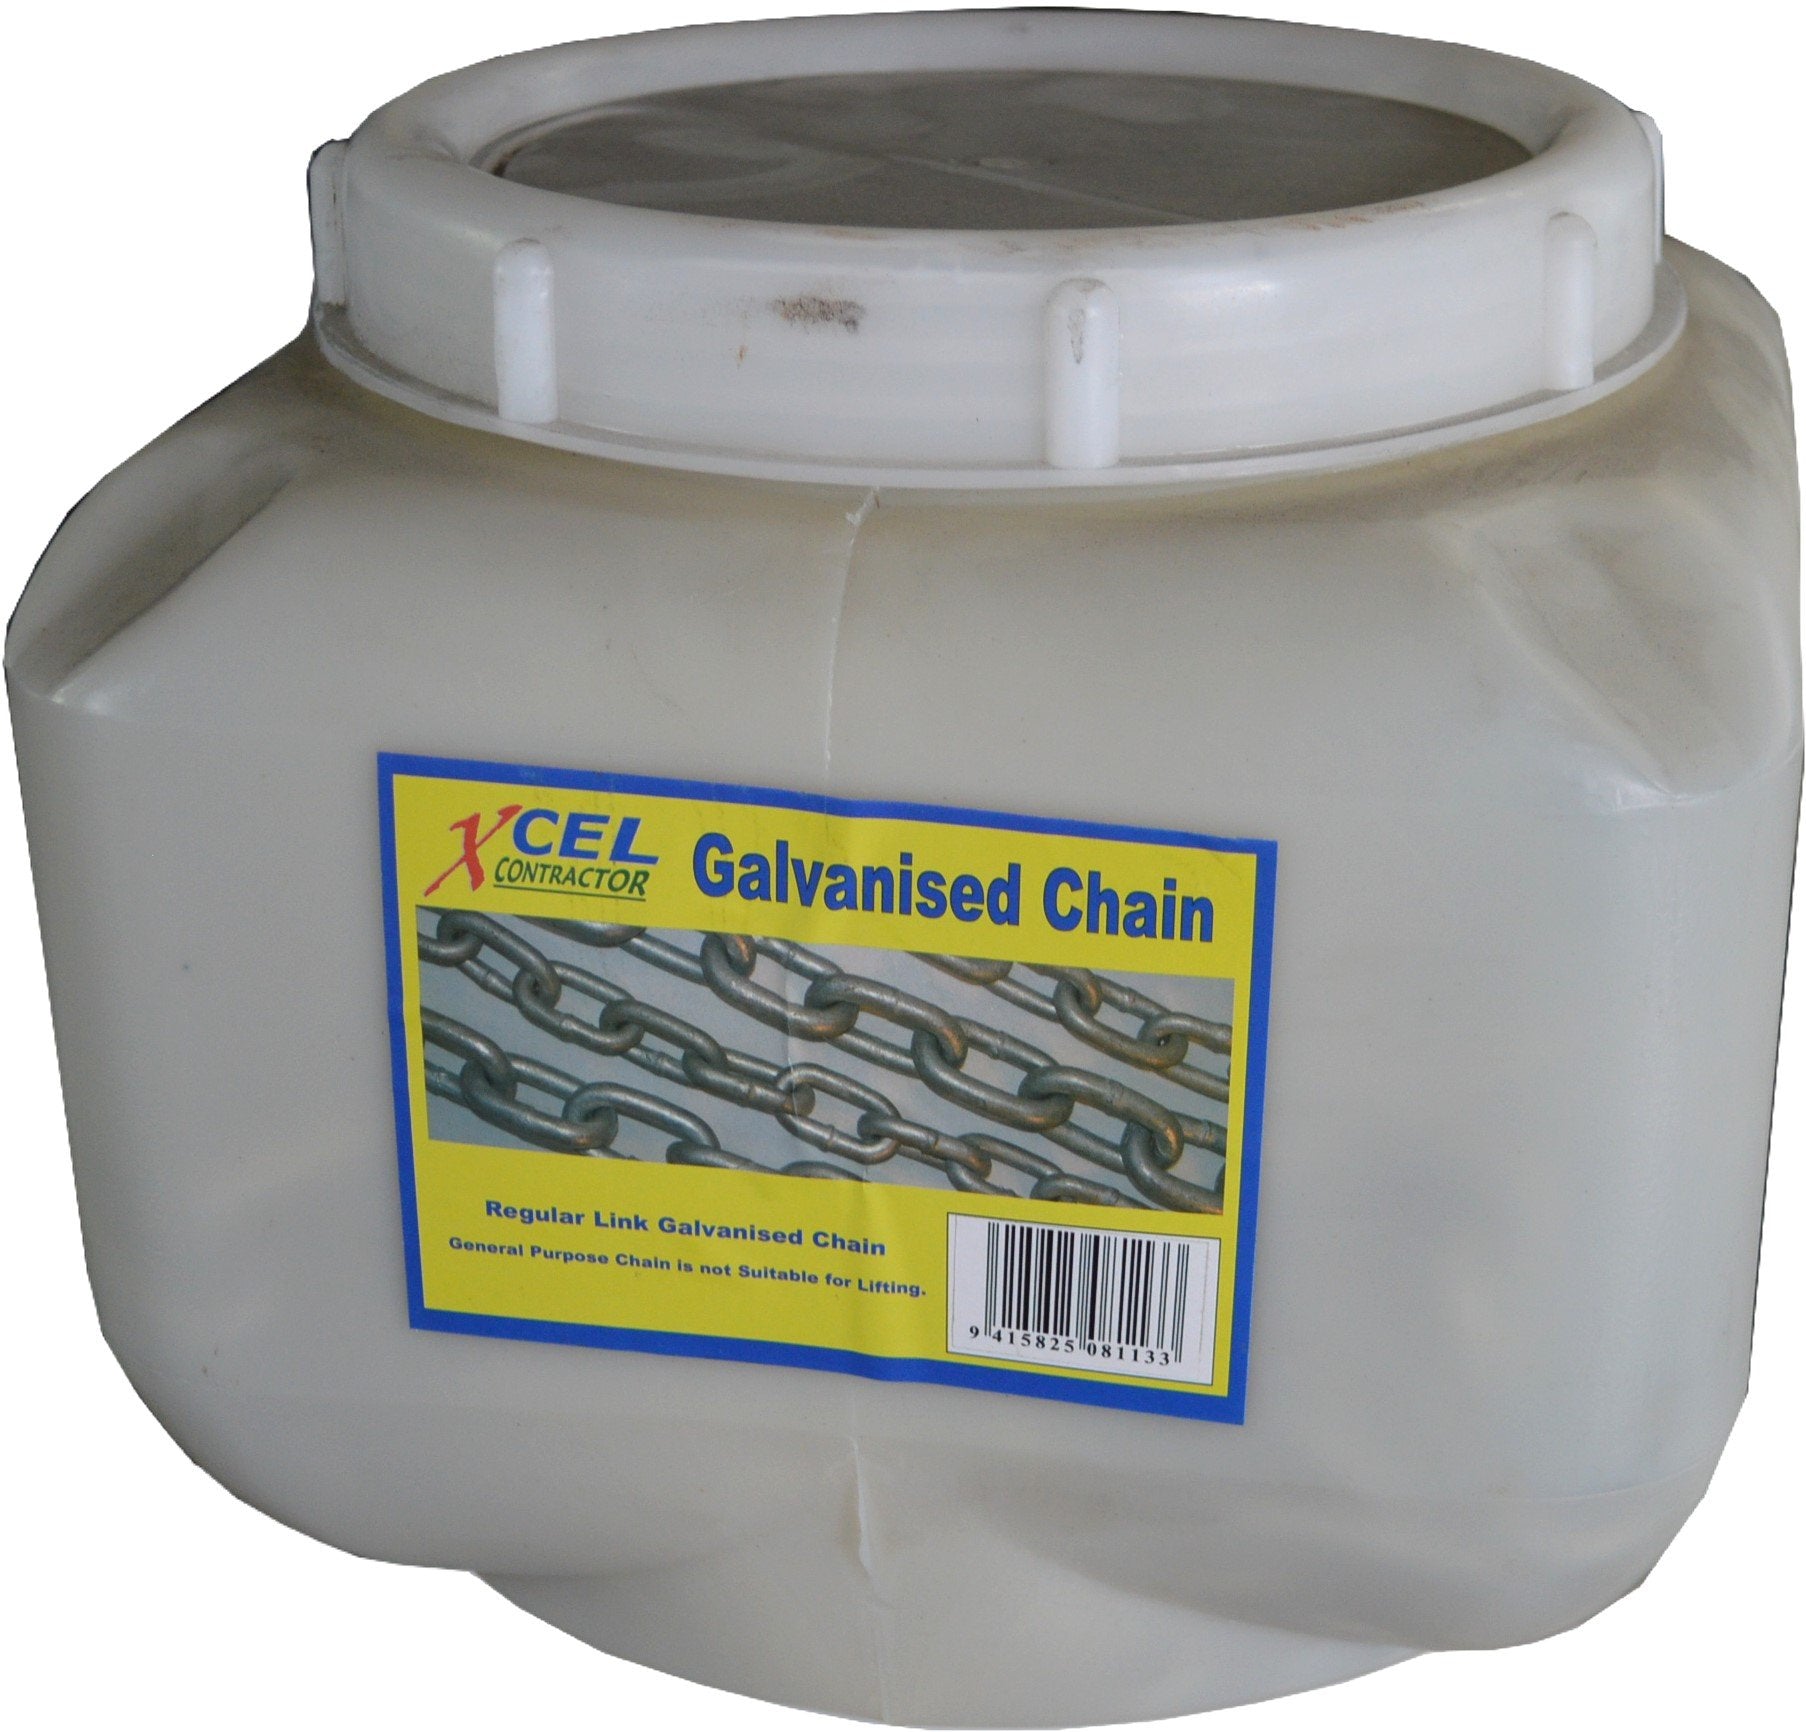 Electro Galvanised Chain 25kg Polypail (145m) 3mm Xcel